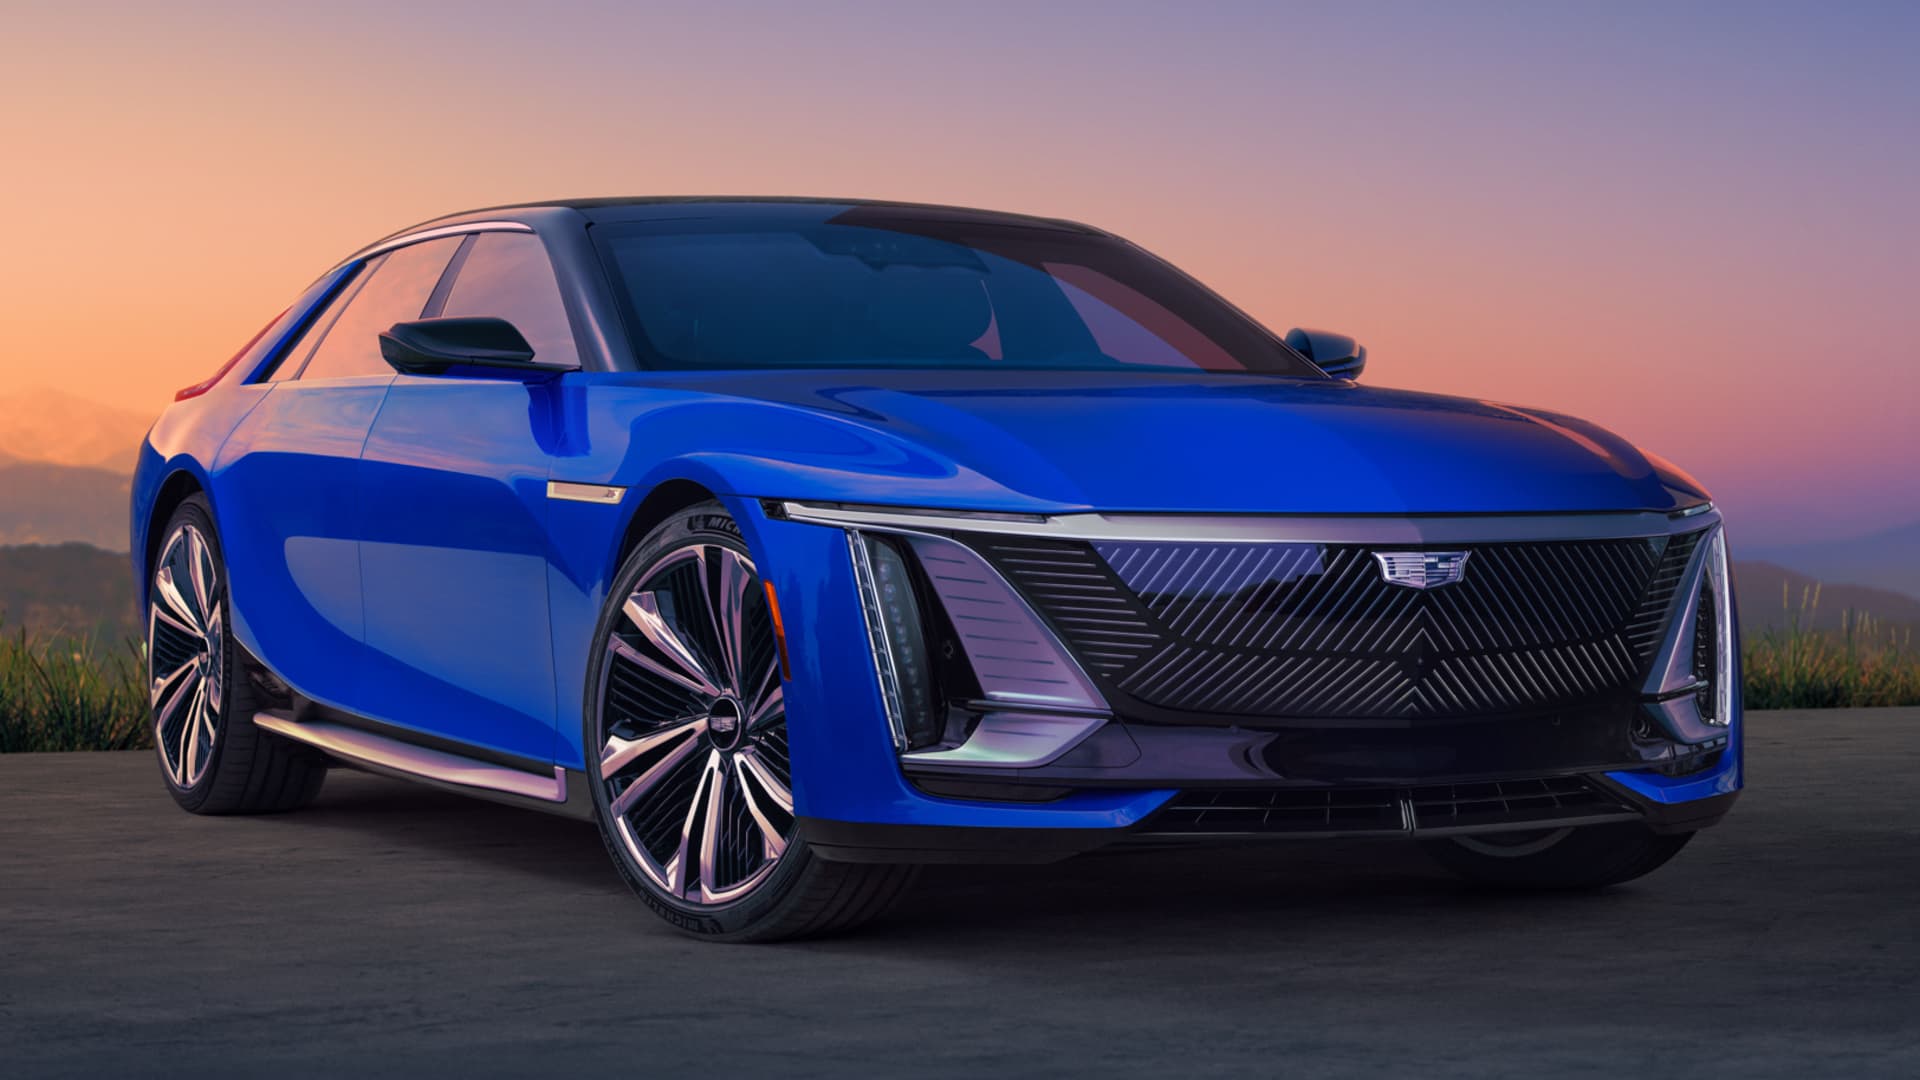 GM tests limits of Cadillac’s brand power with $300,000 Celestiq electric car